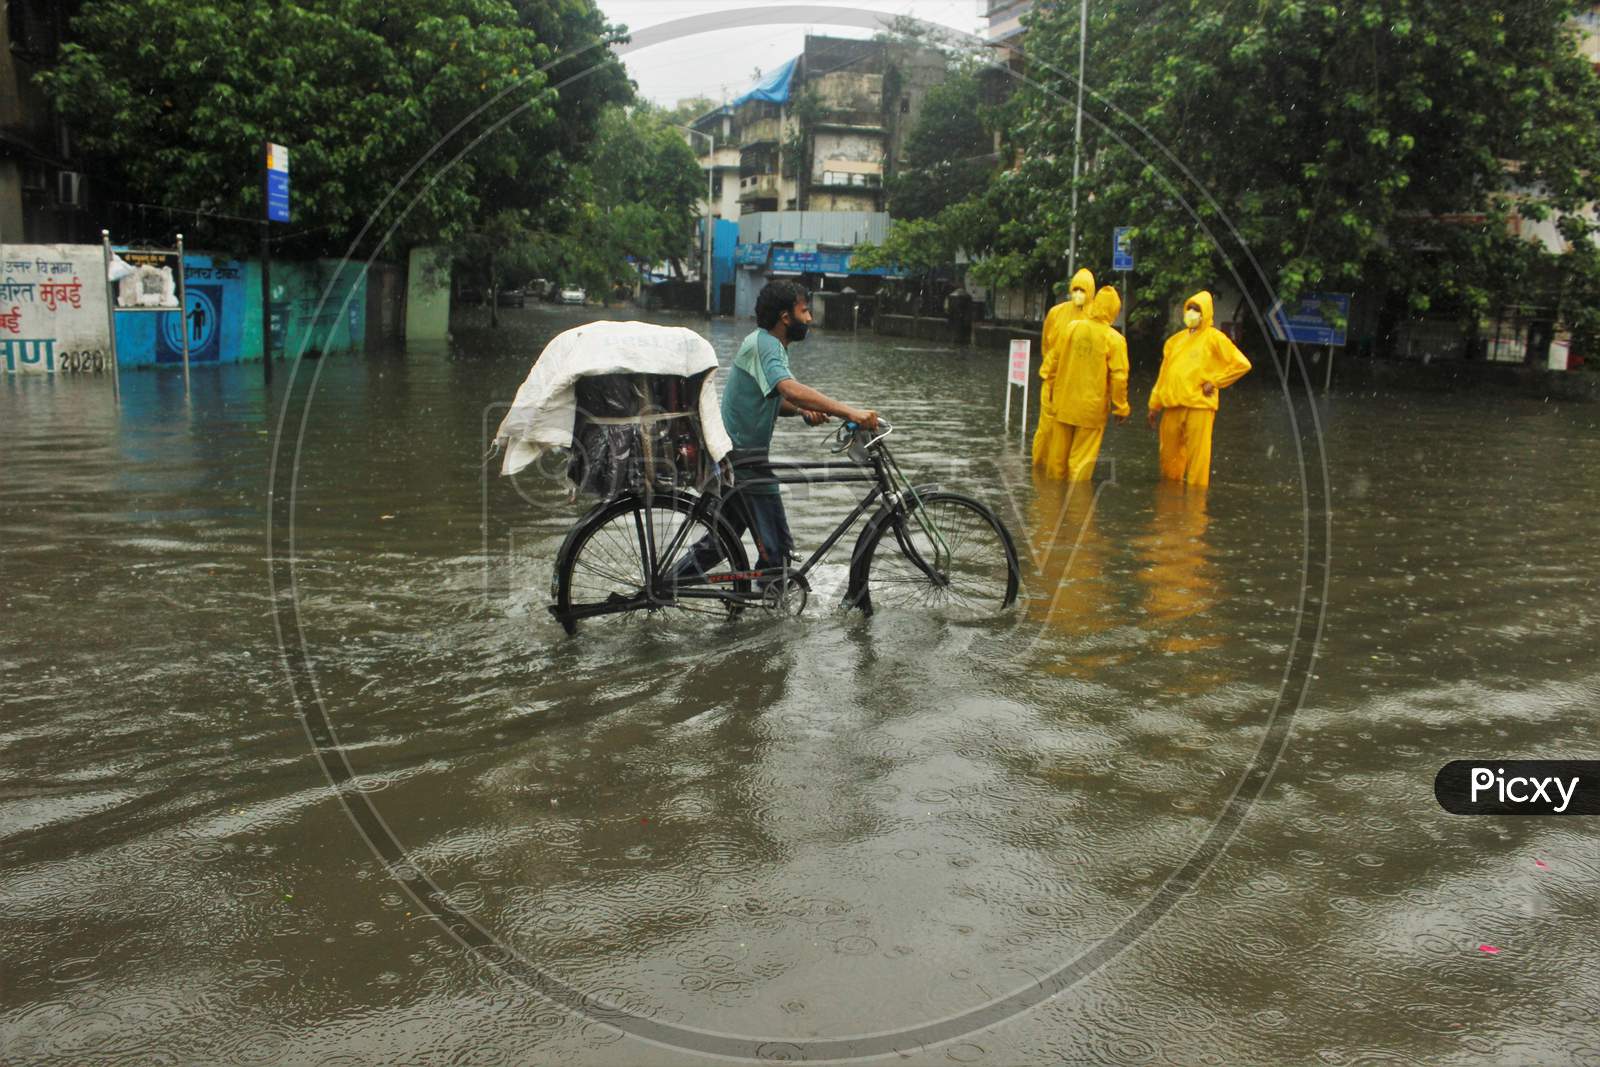 A man walks with his cycle on a waterlogged road during rains, in Mumbai, India, July, 2020.